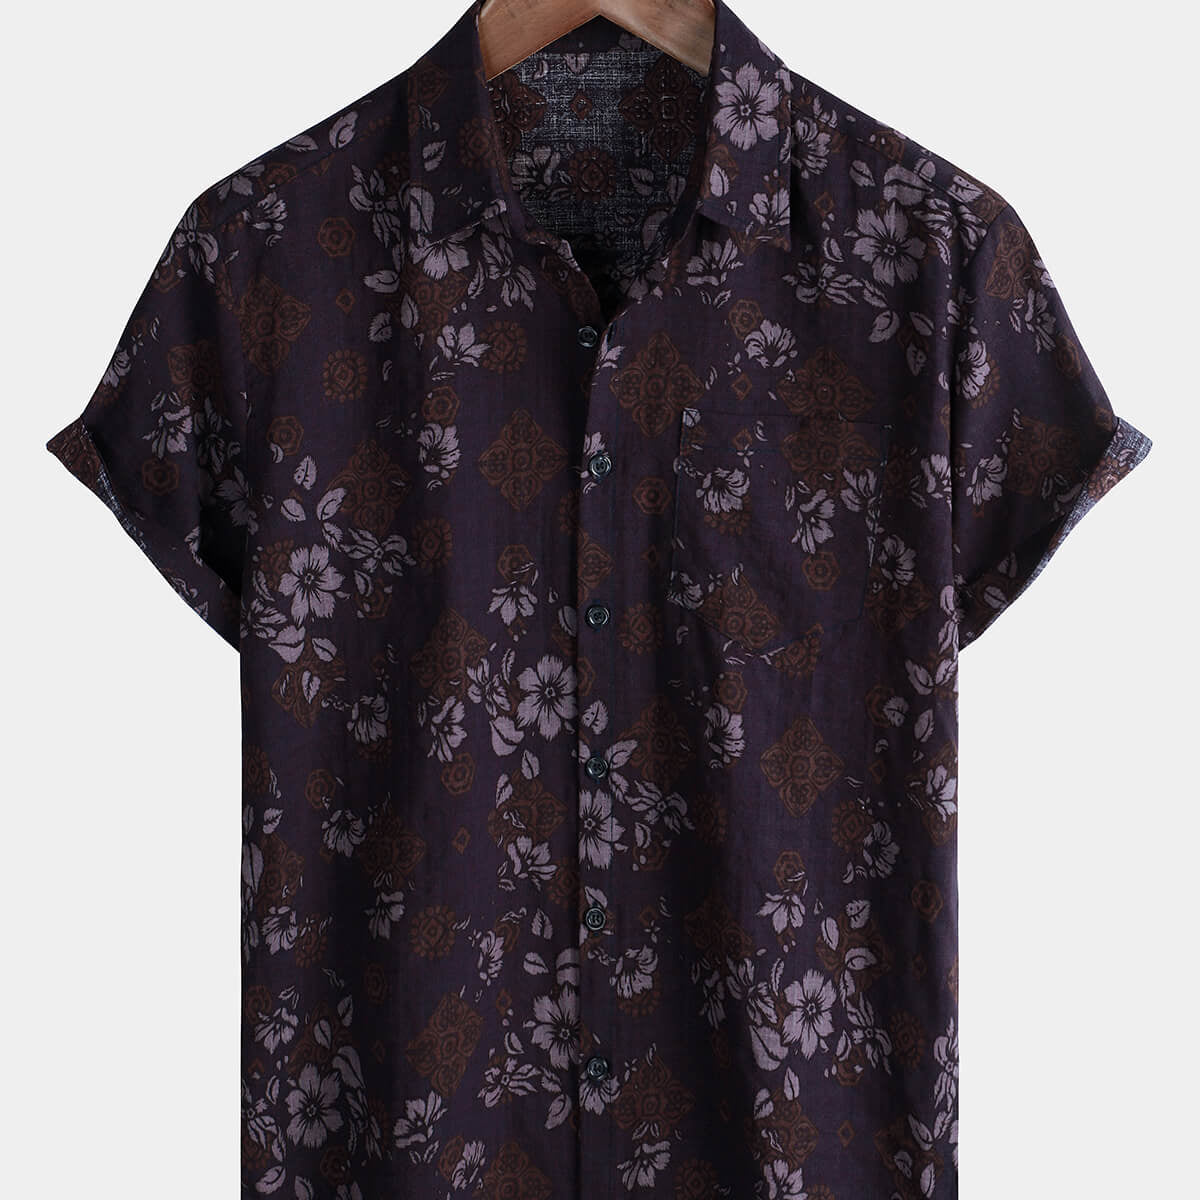 Men's Floral Retro Holiday Casual Summer Short Sleeve Button Up Shirt